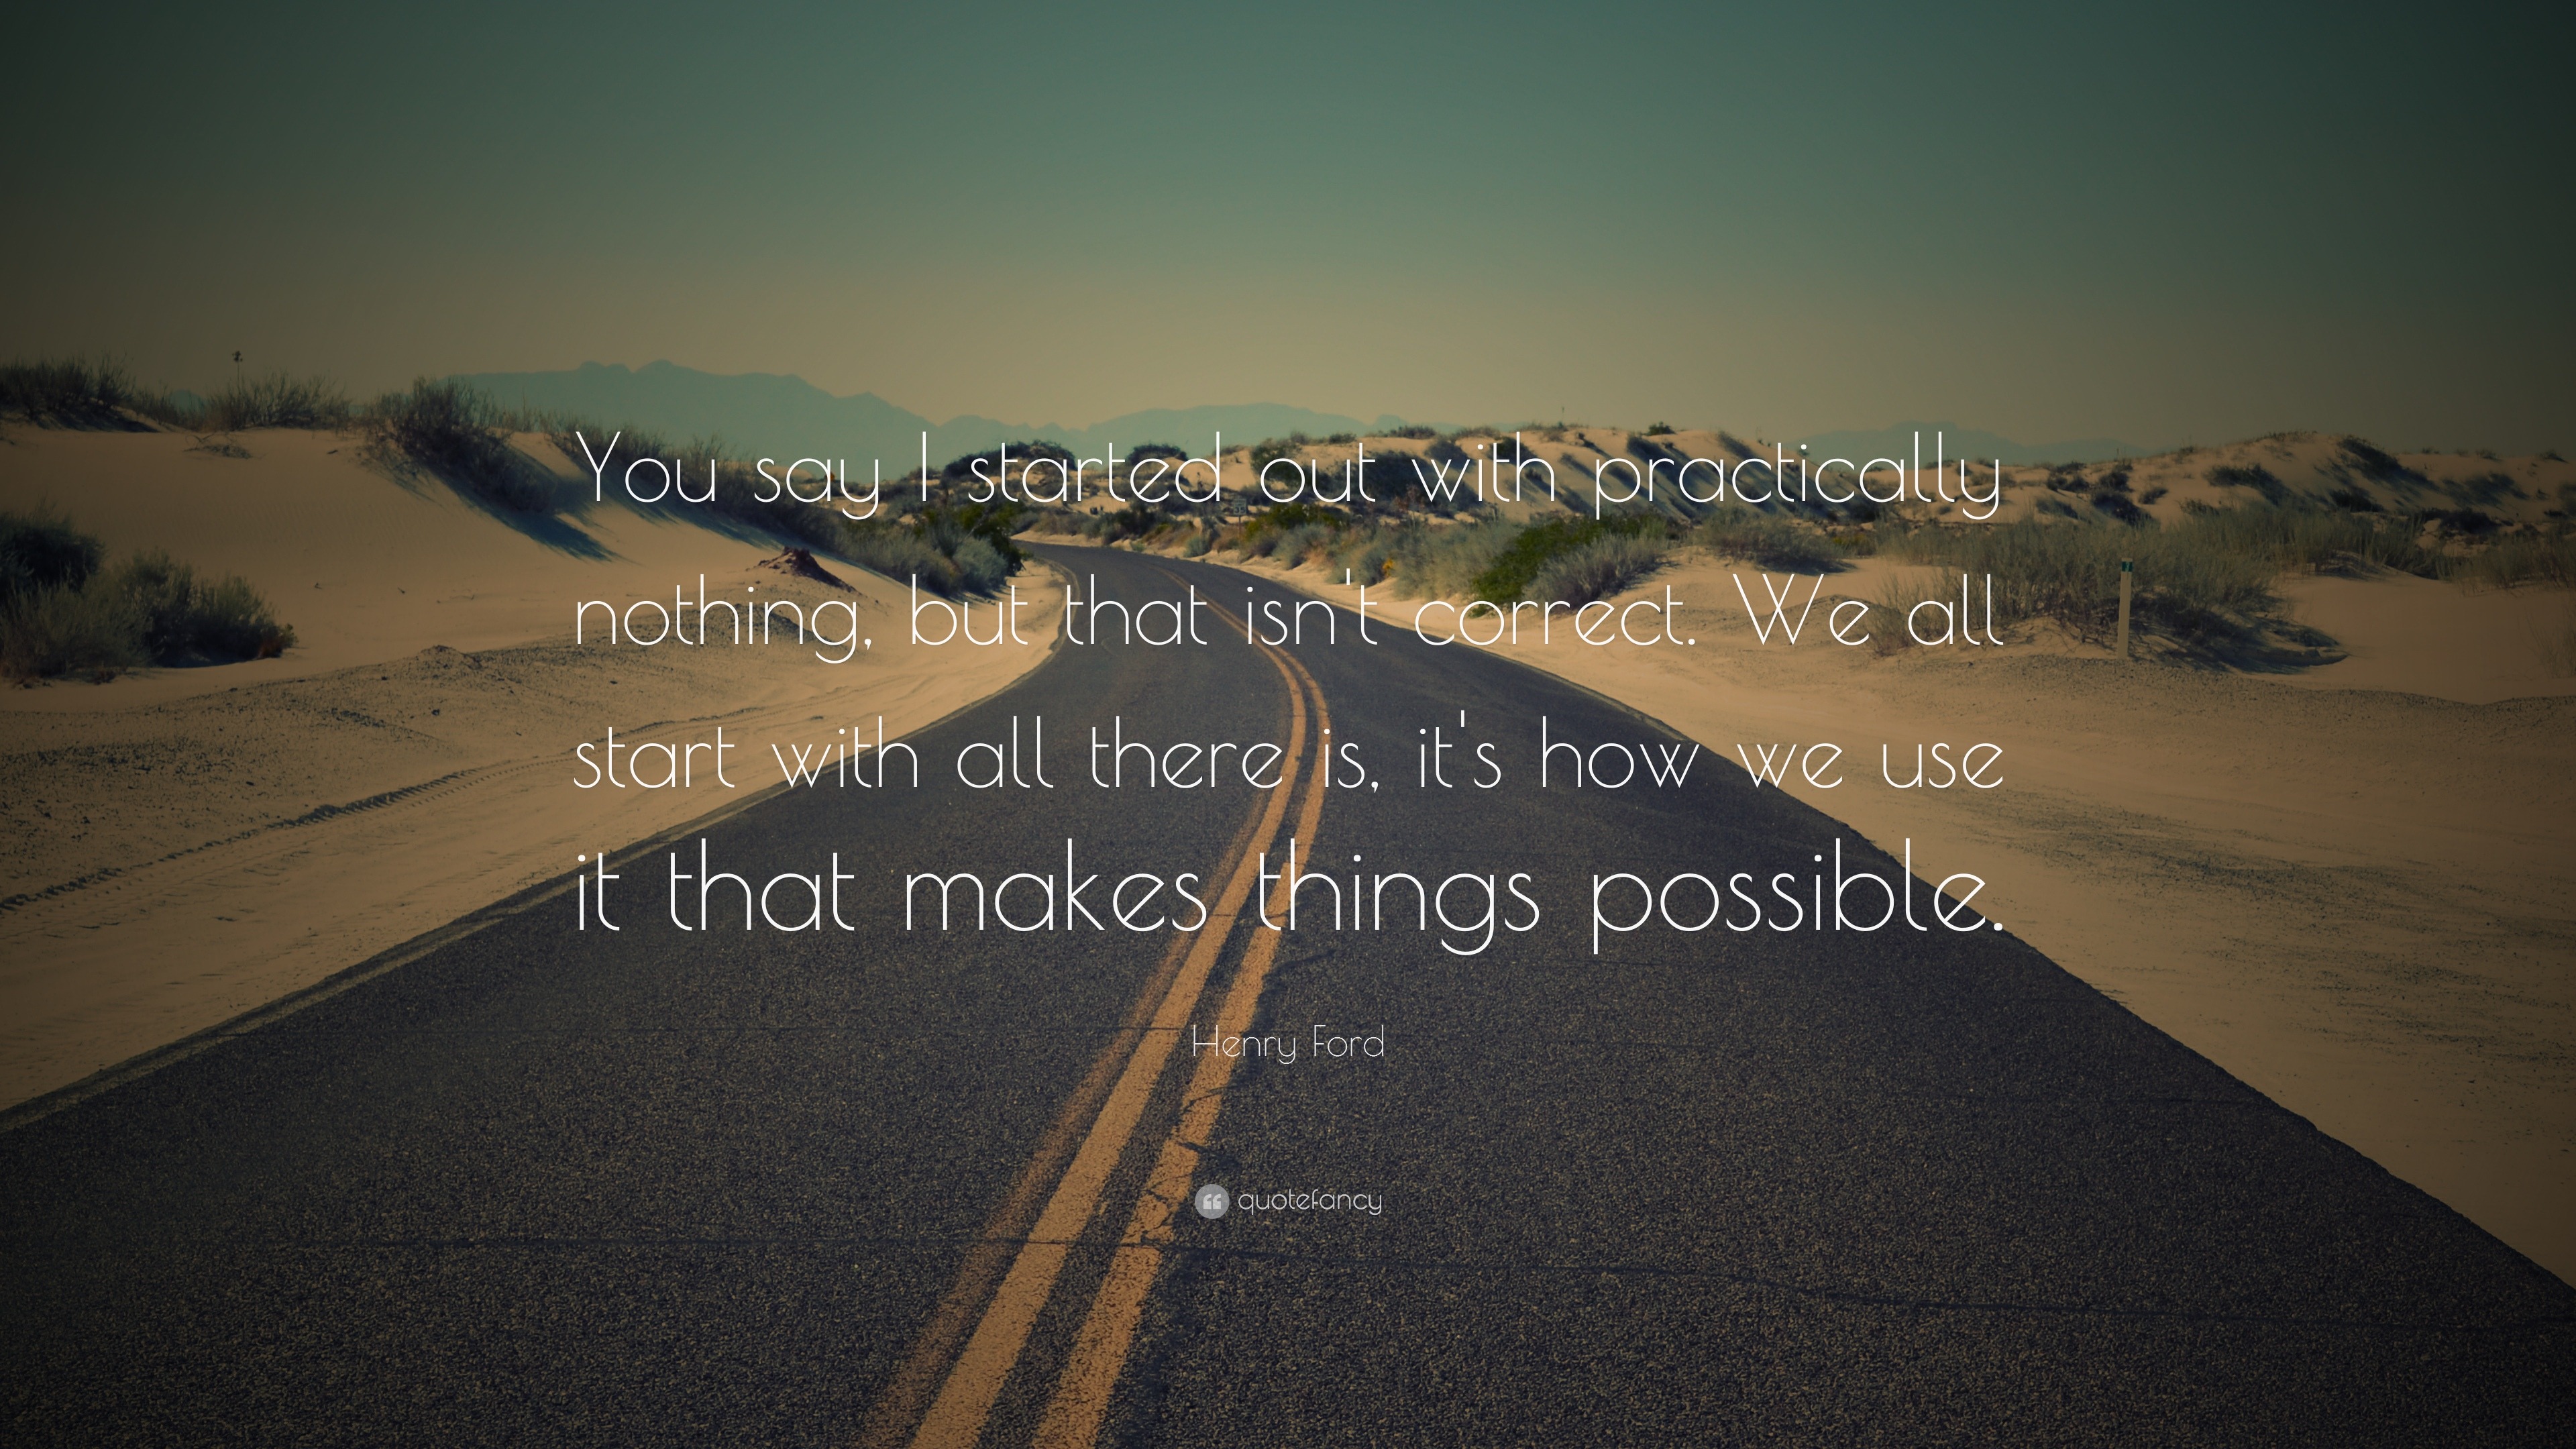 Henry Ford Quote: “You say I started out with practically nothing, but ...